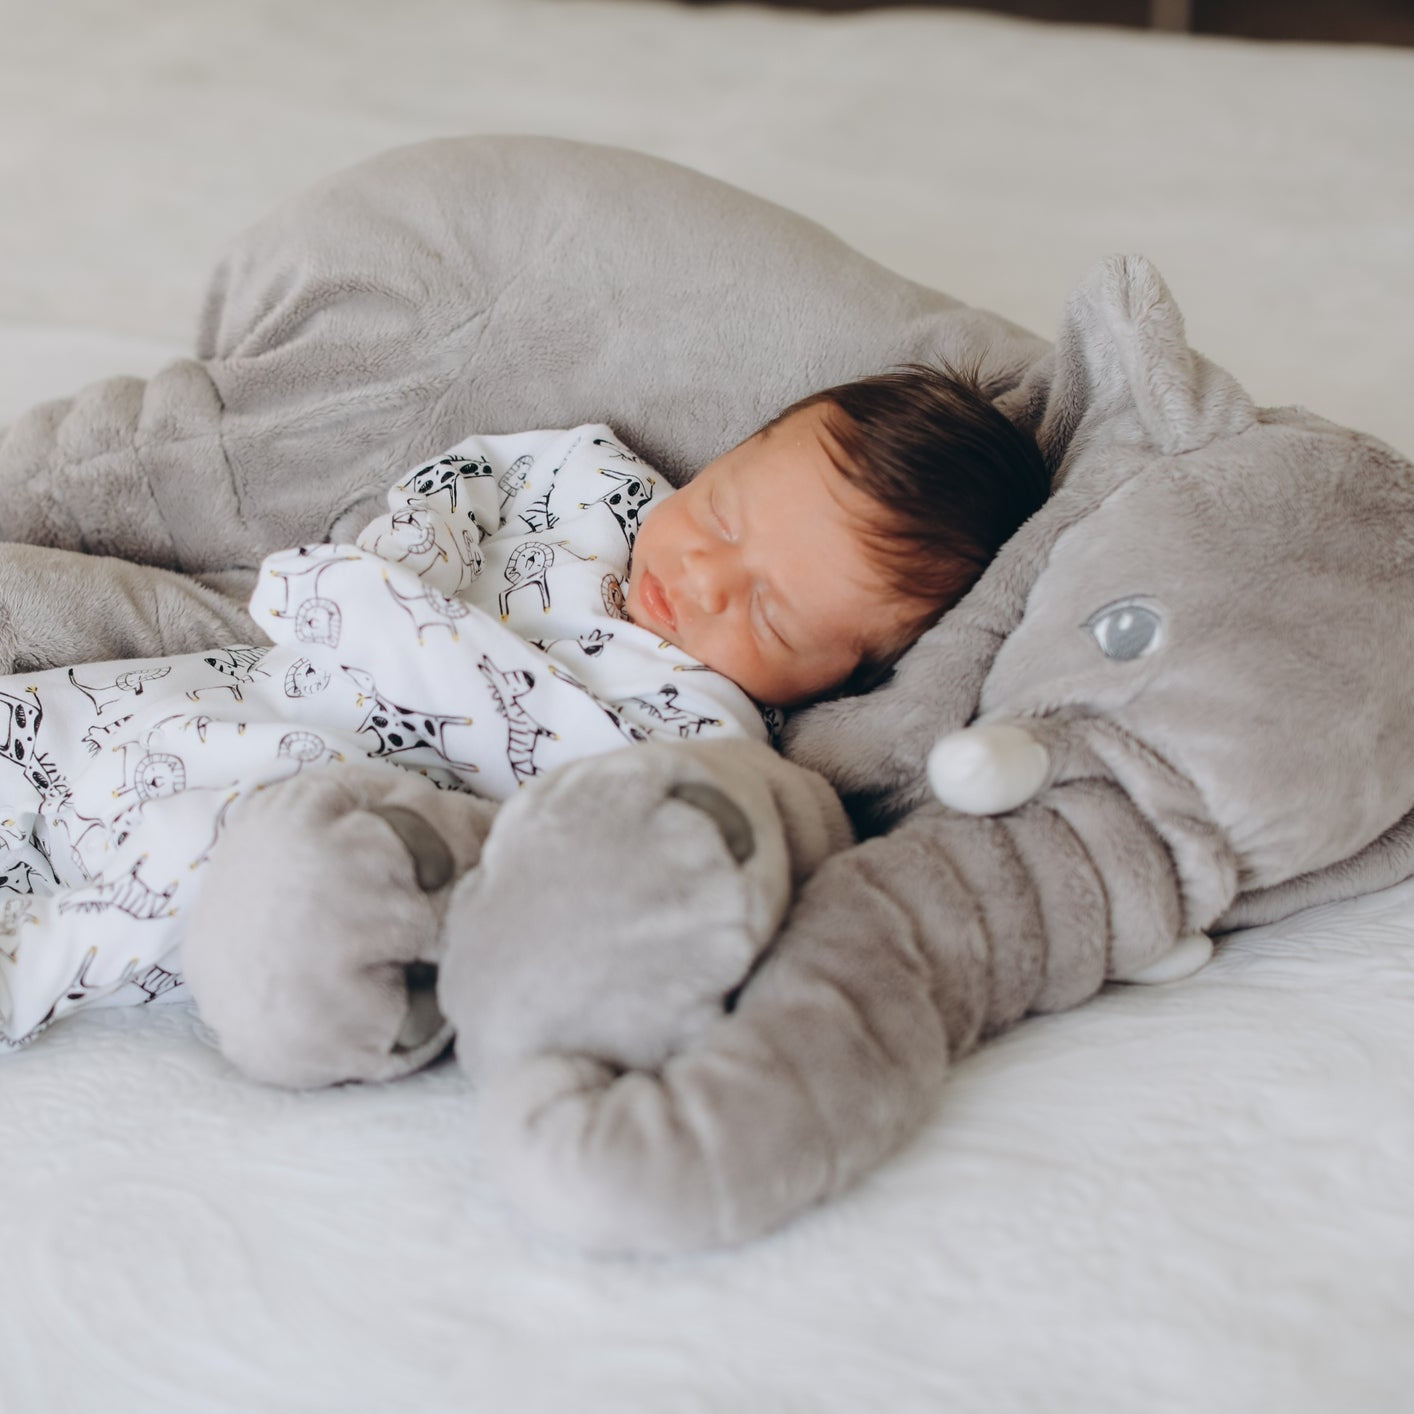 elephant cuddle pillow for kids